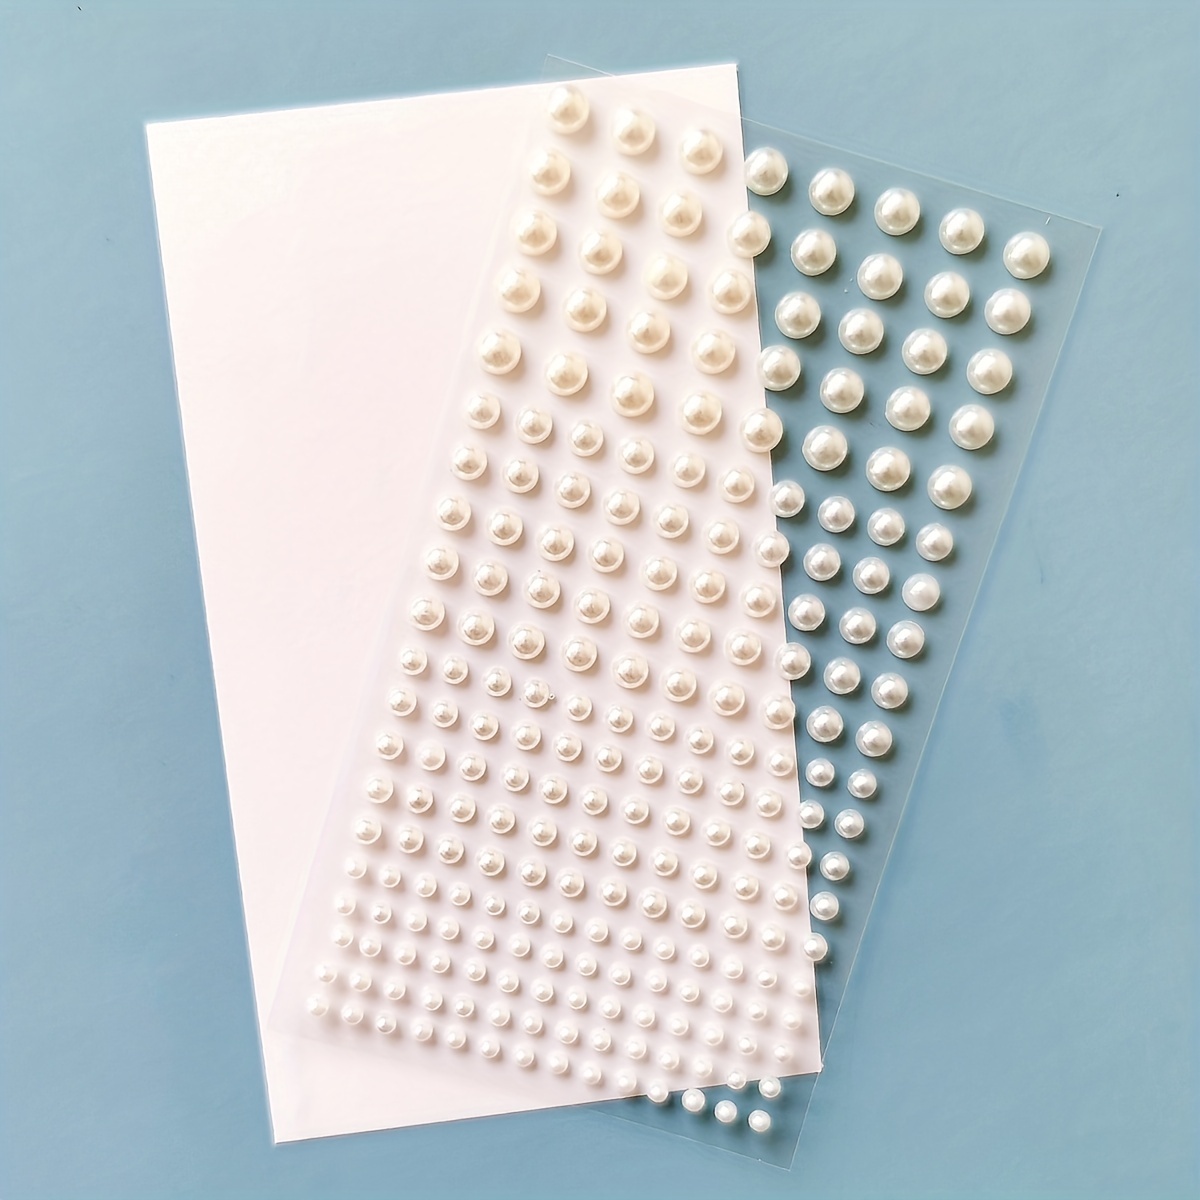 7 Sizes Self Adhesive White AB Hair Pearl Stickers, 2032 Pieces